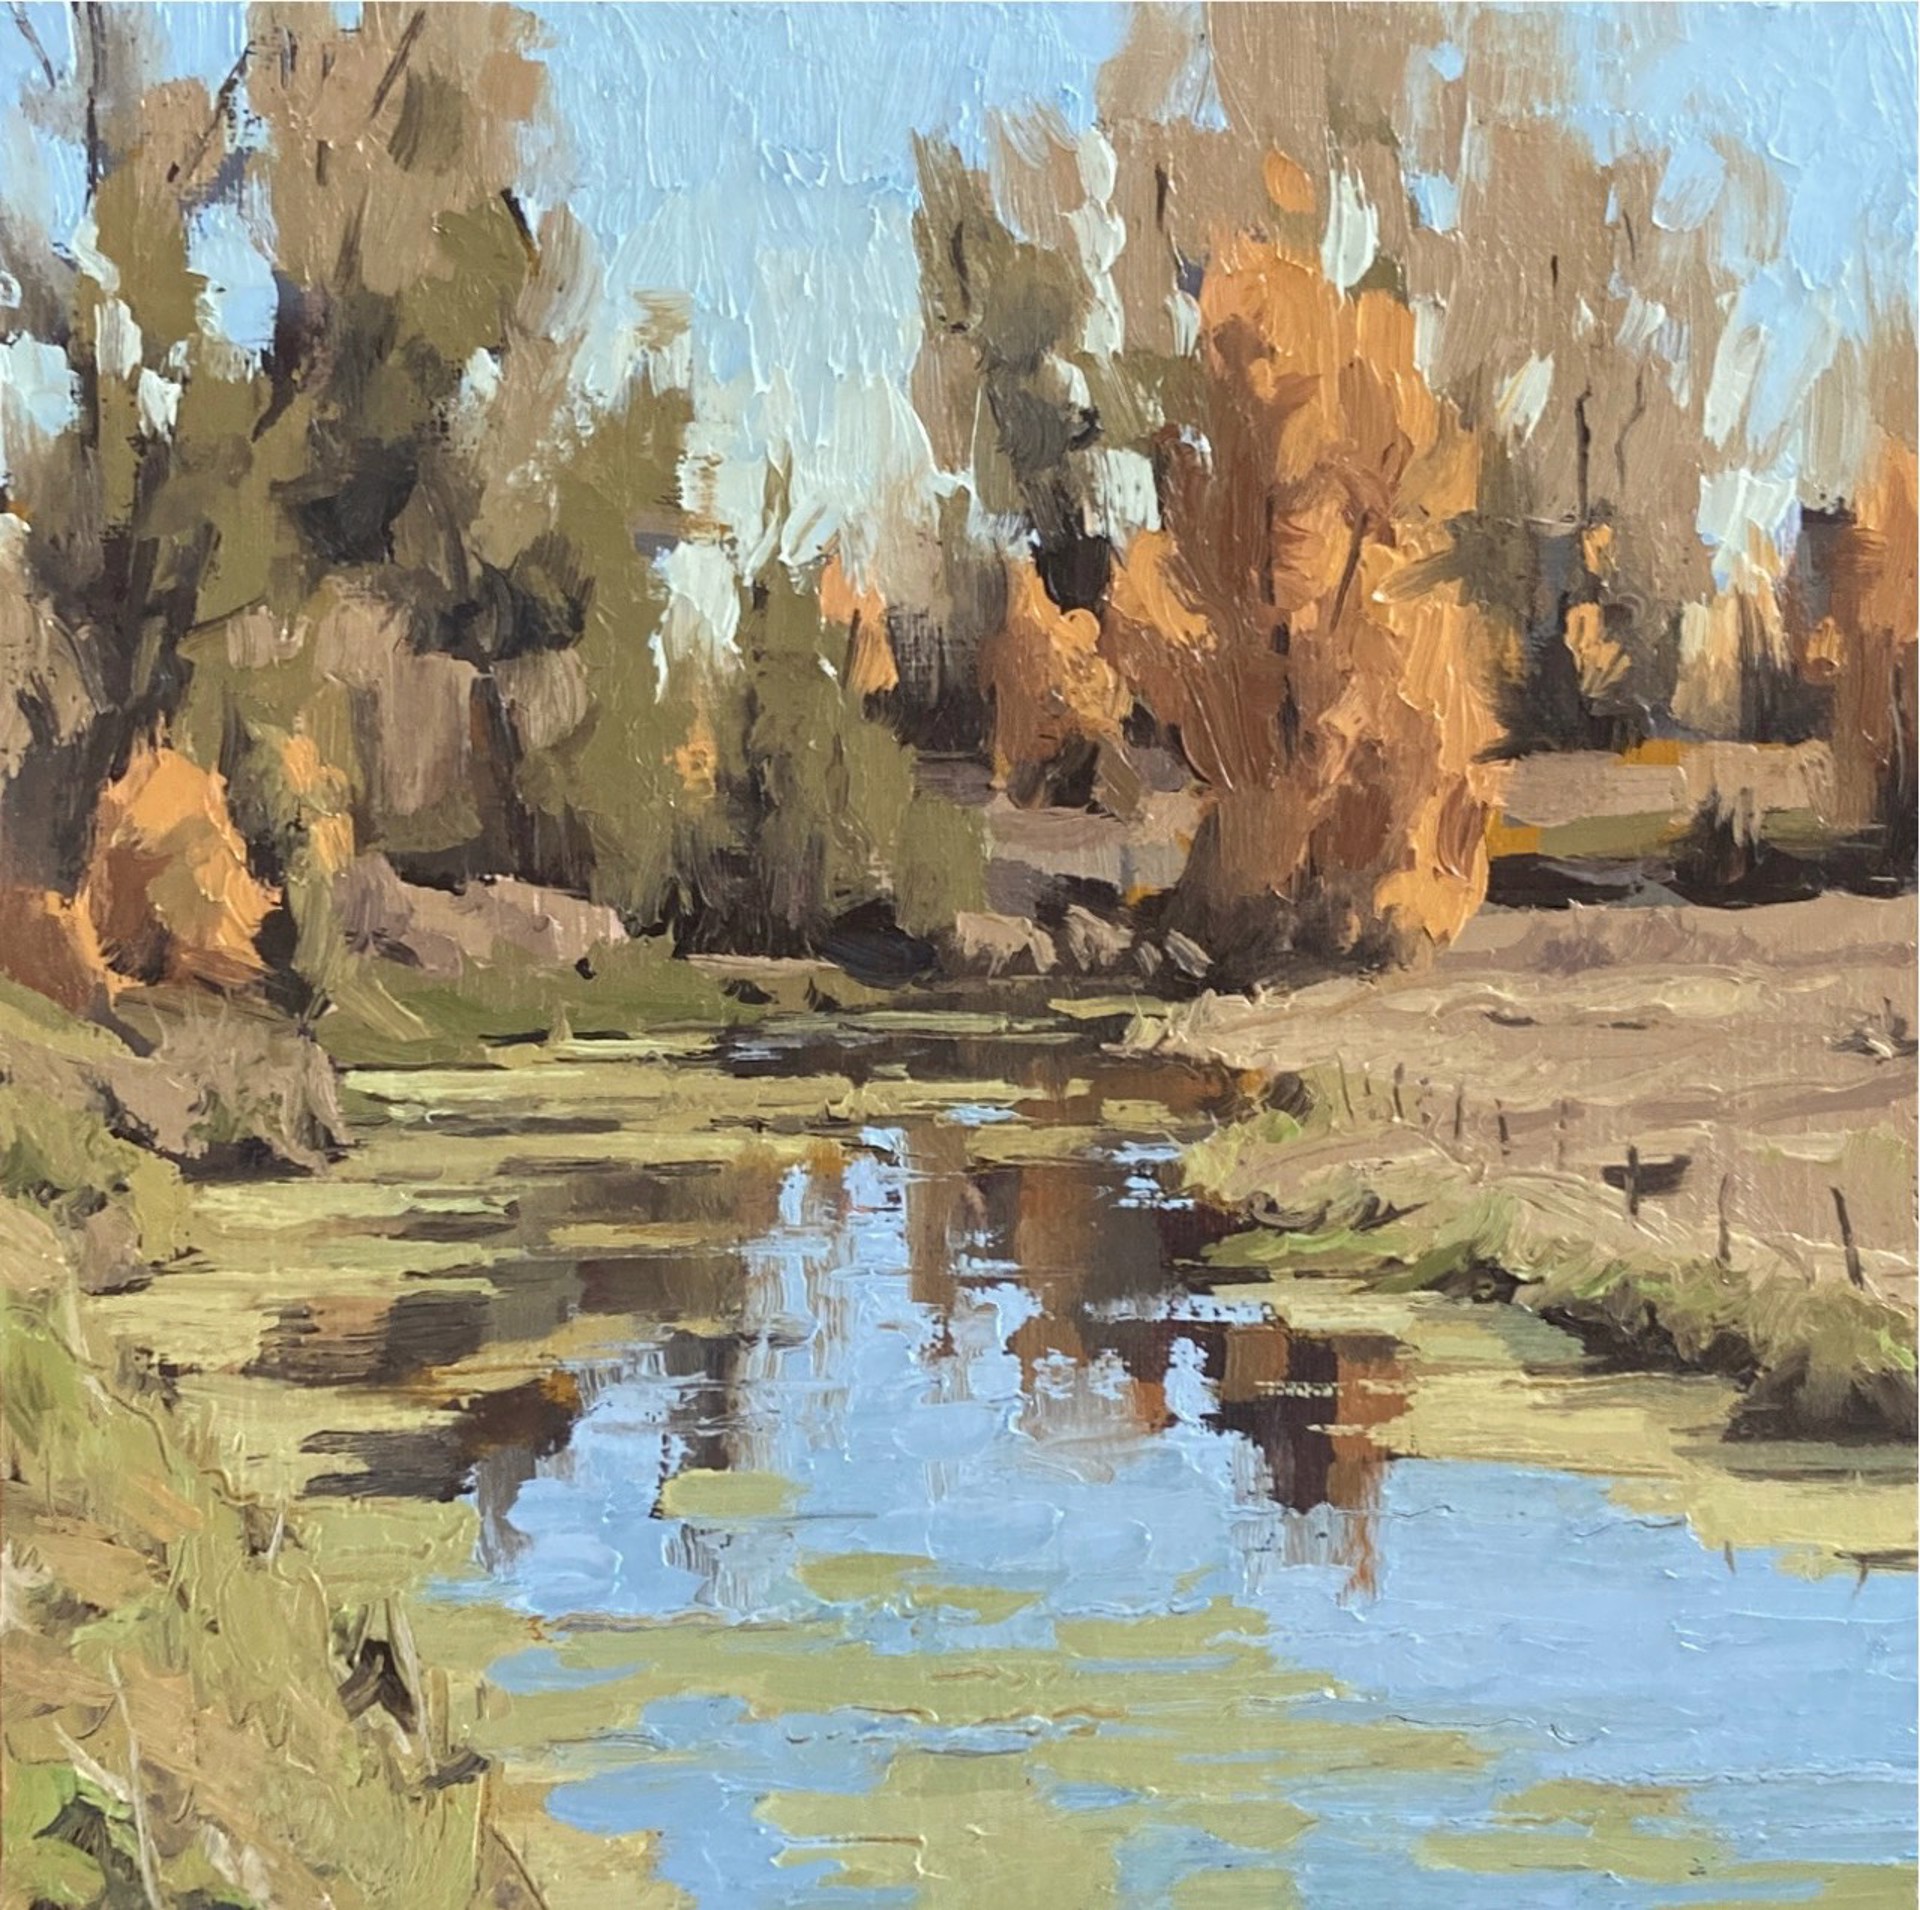 TEXAS SLOUGH by Donald Tapp